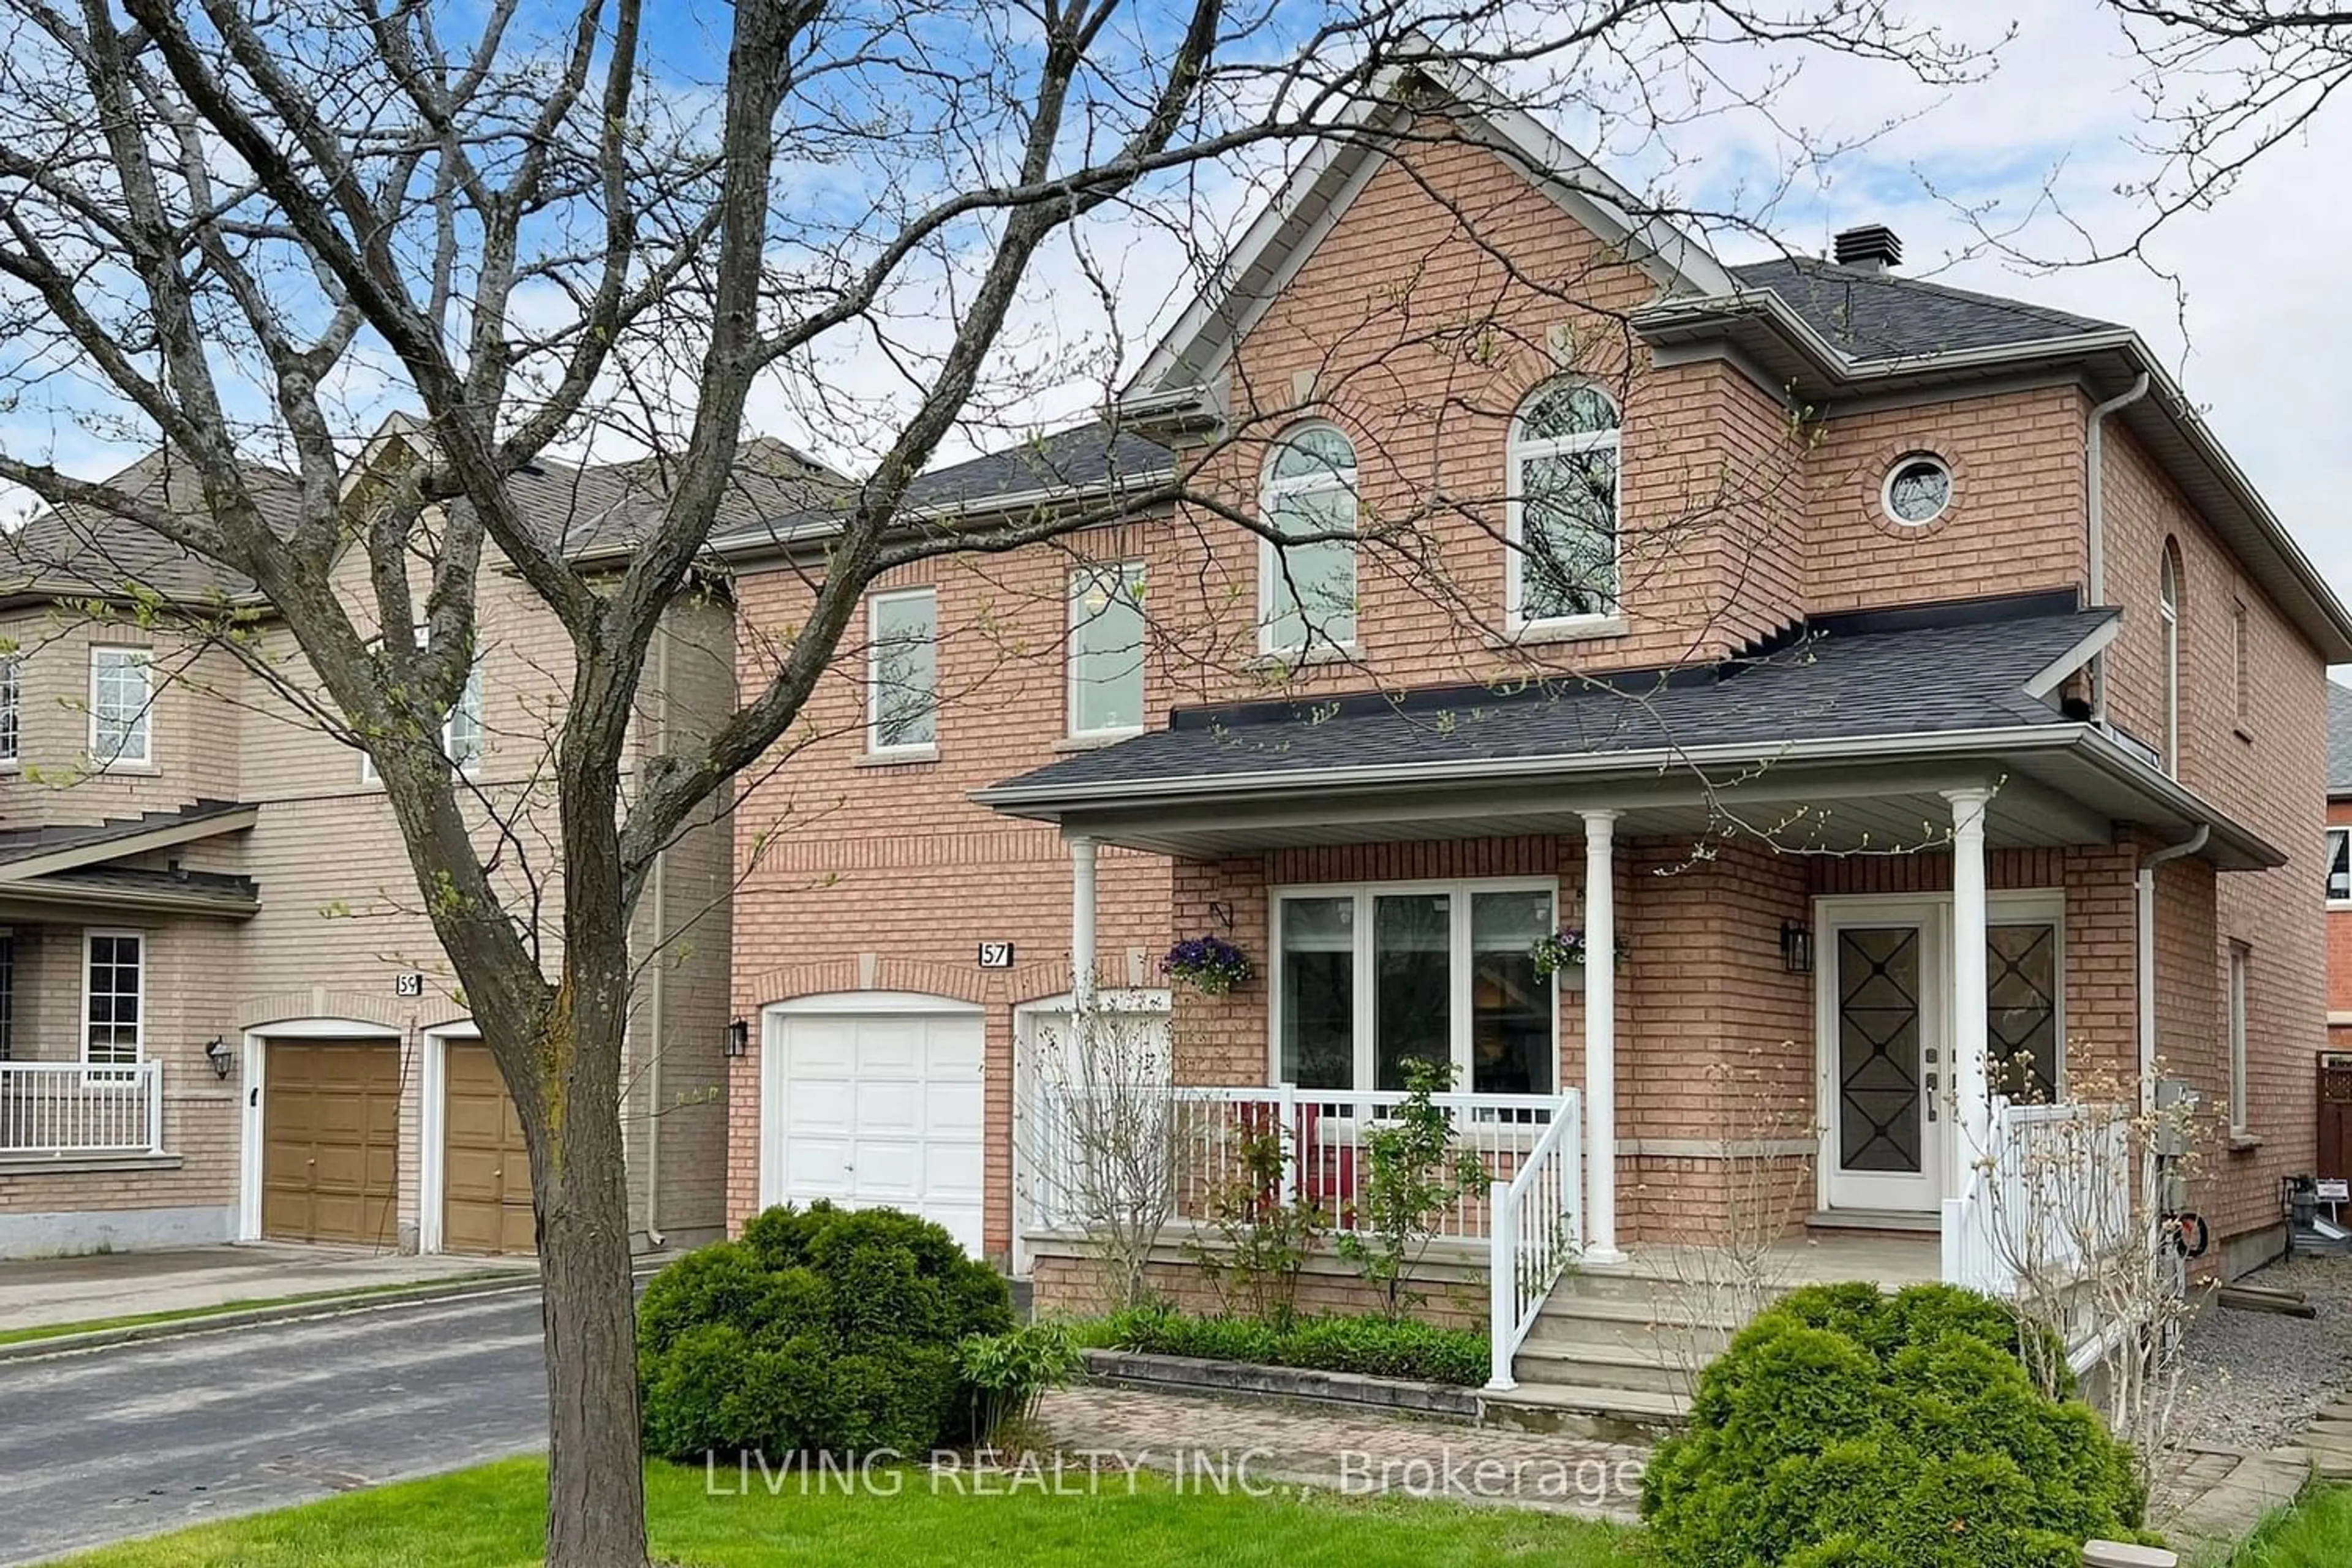 Home with brick exterior material for 57 Palisade Cres, Richmond Hill Ontario L4S 2H9